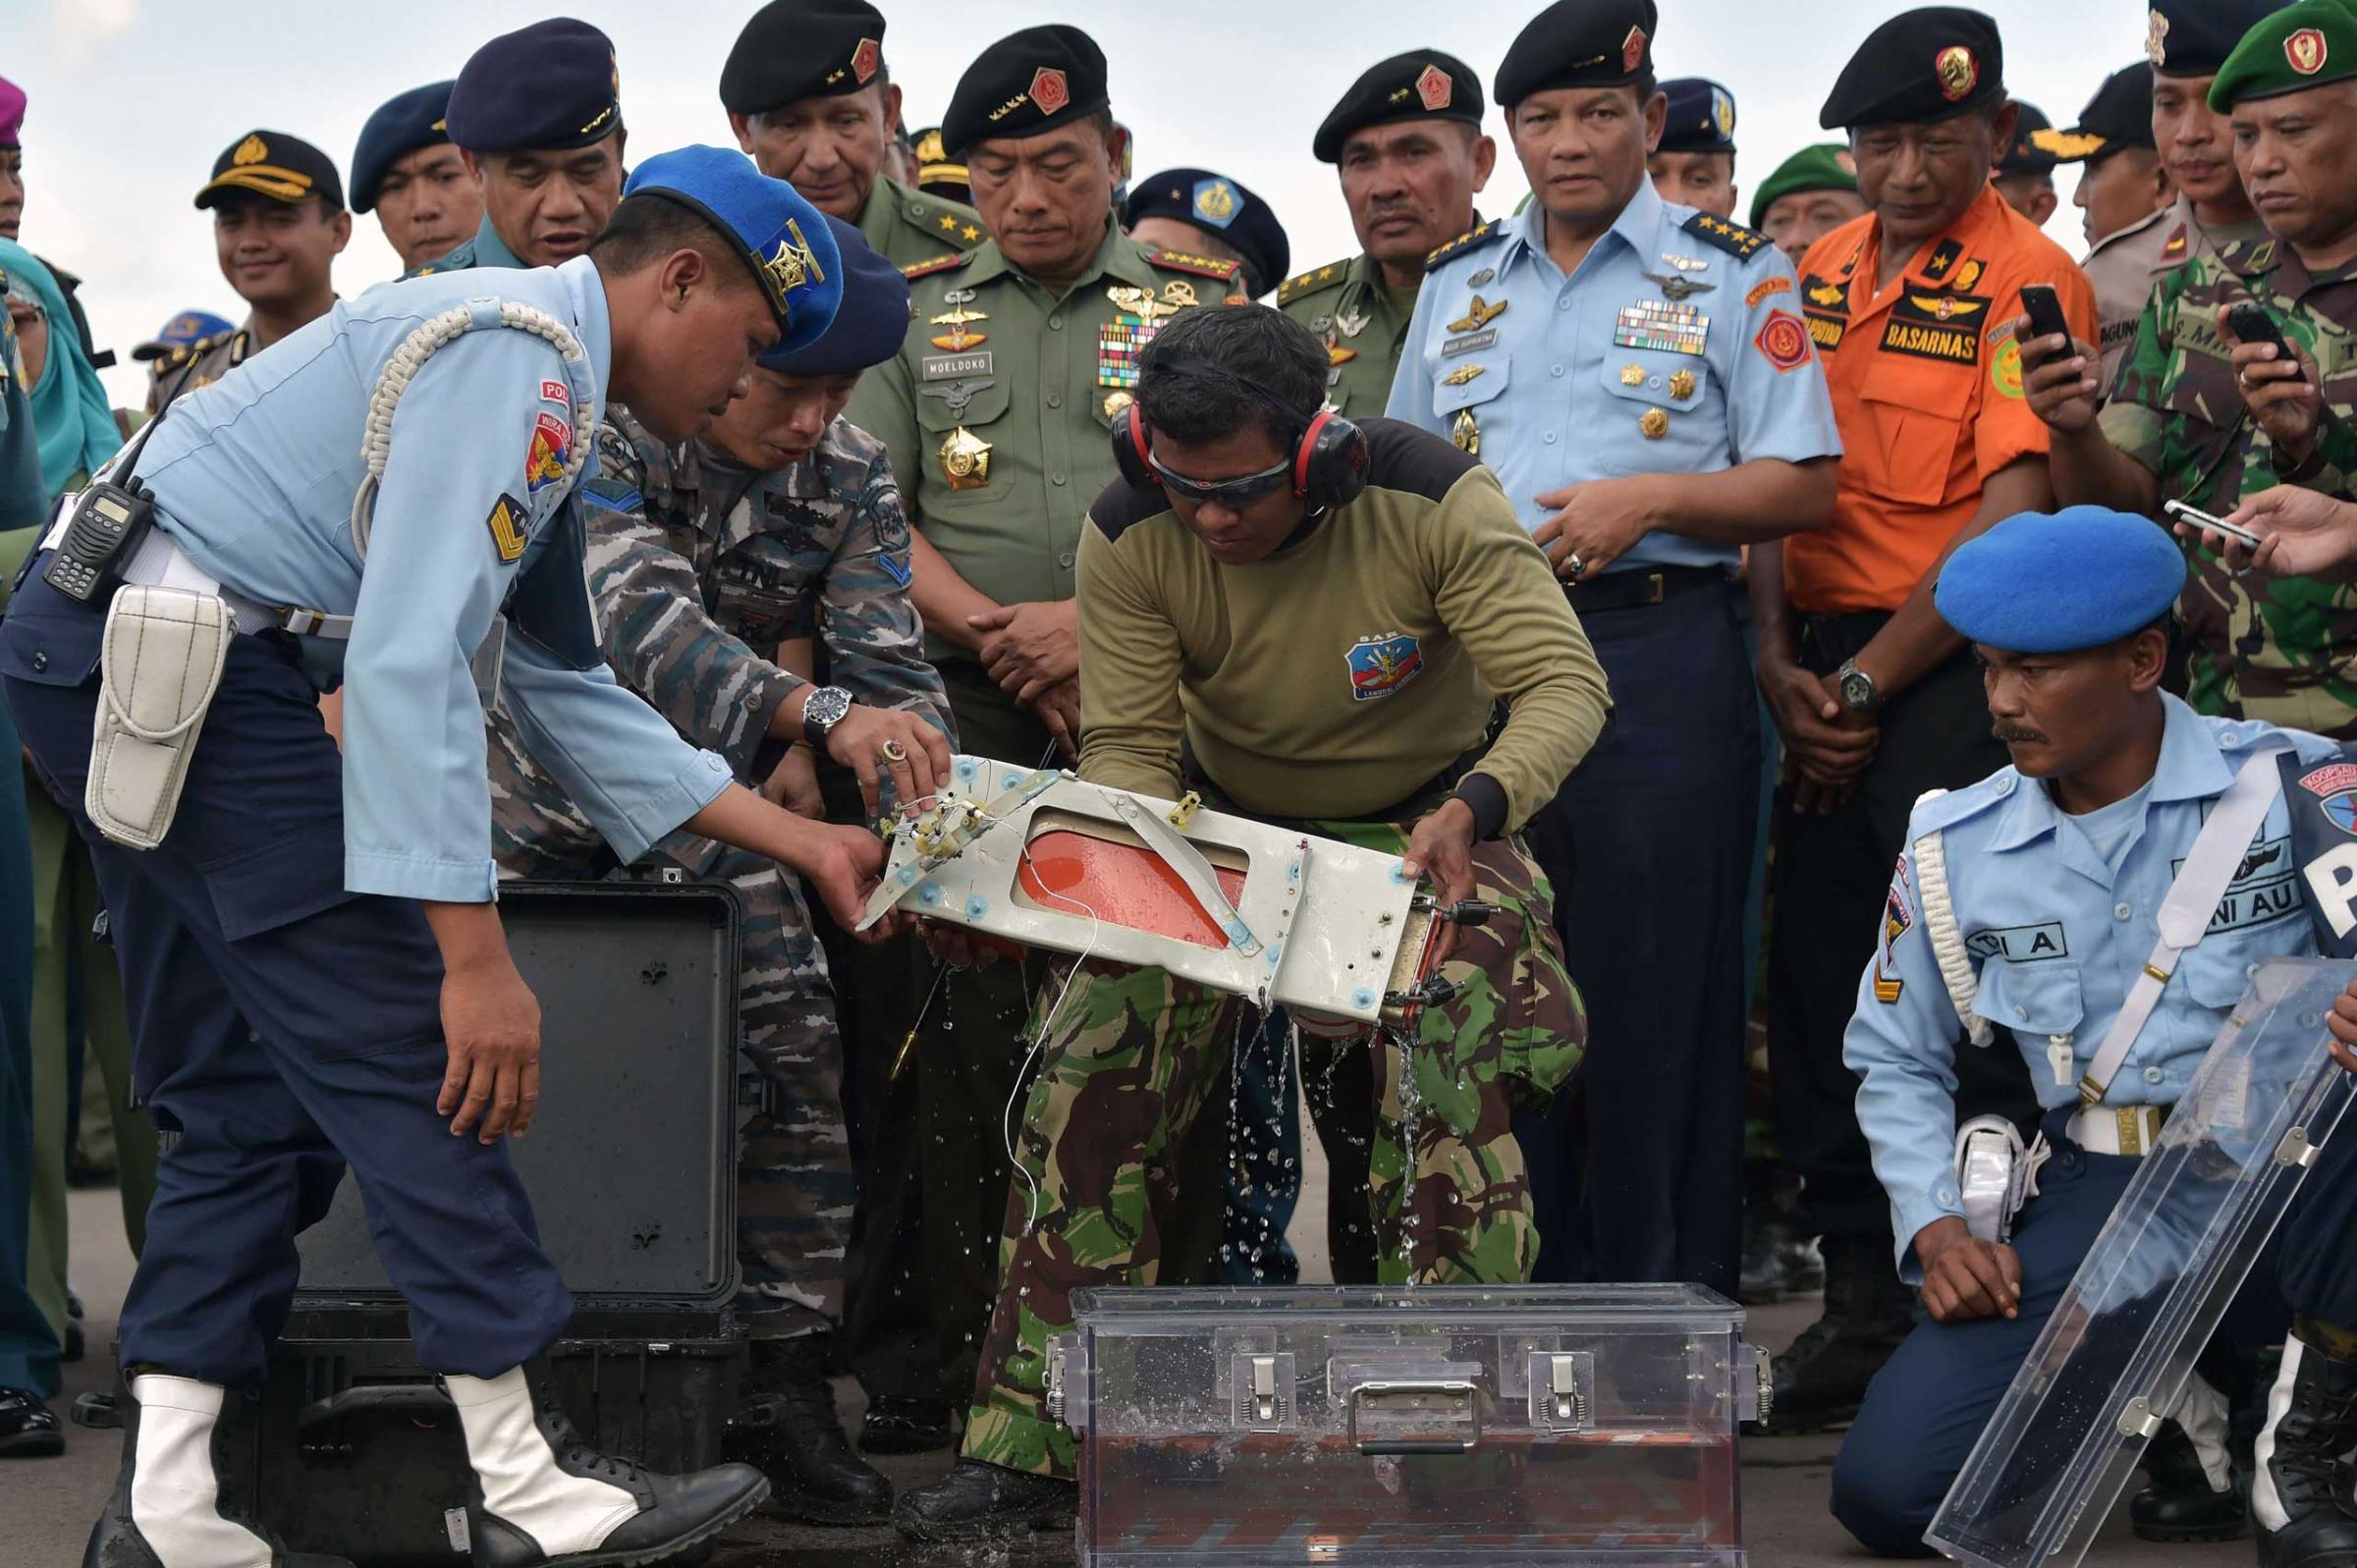 Jan. 12, 2015. Indonesian officers move the flight data recorder of the AirAsia flight QZ8501 that went down with 162 passengers into a suitable protective transportation case in the town of Pangkalan Bun in Indonesia after it was retrieved from the Java Sea.